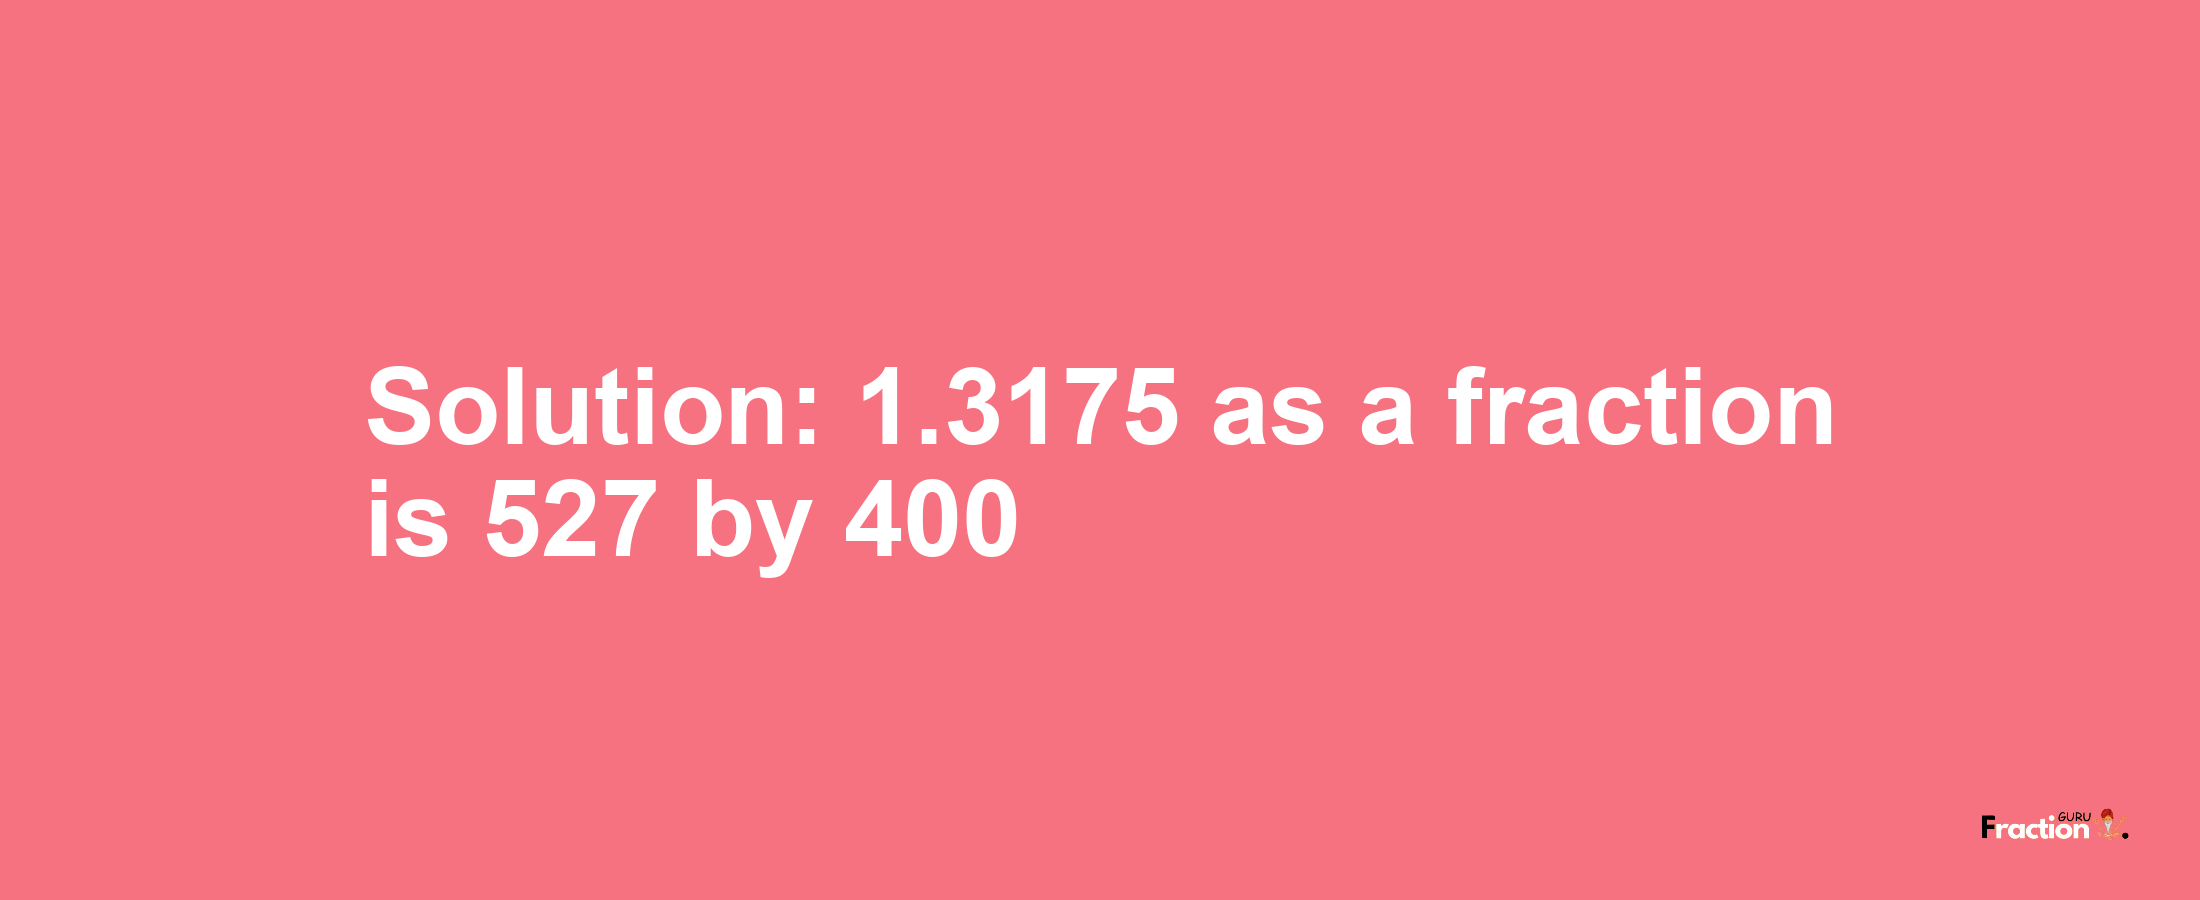 Solution:1.3175 as a fraction is 527/400